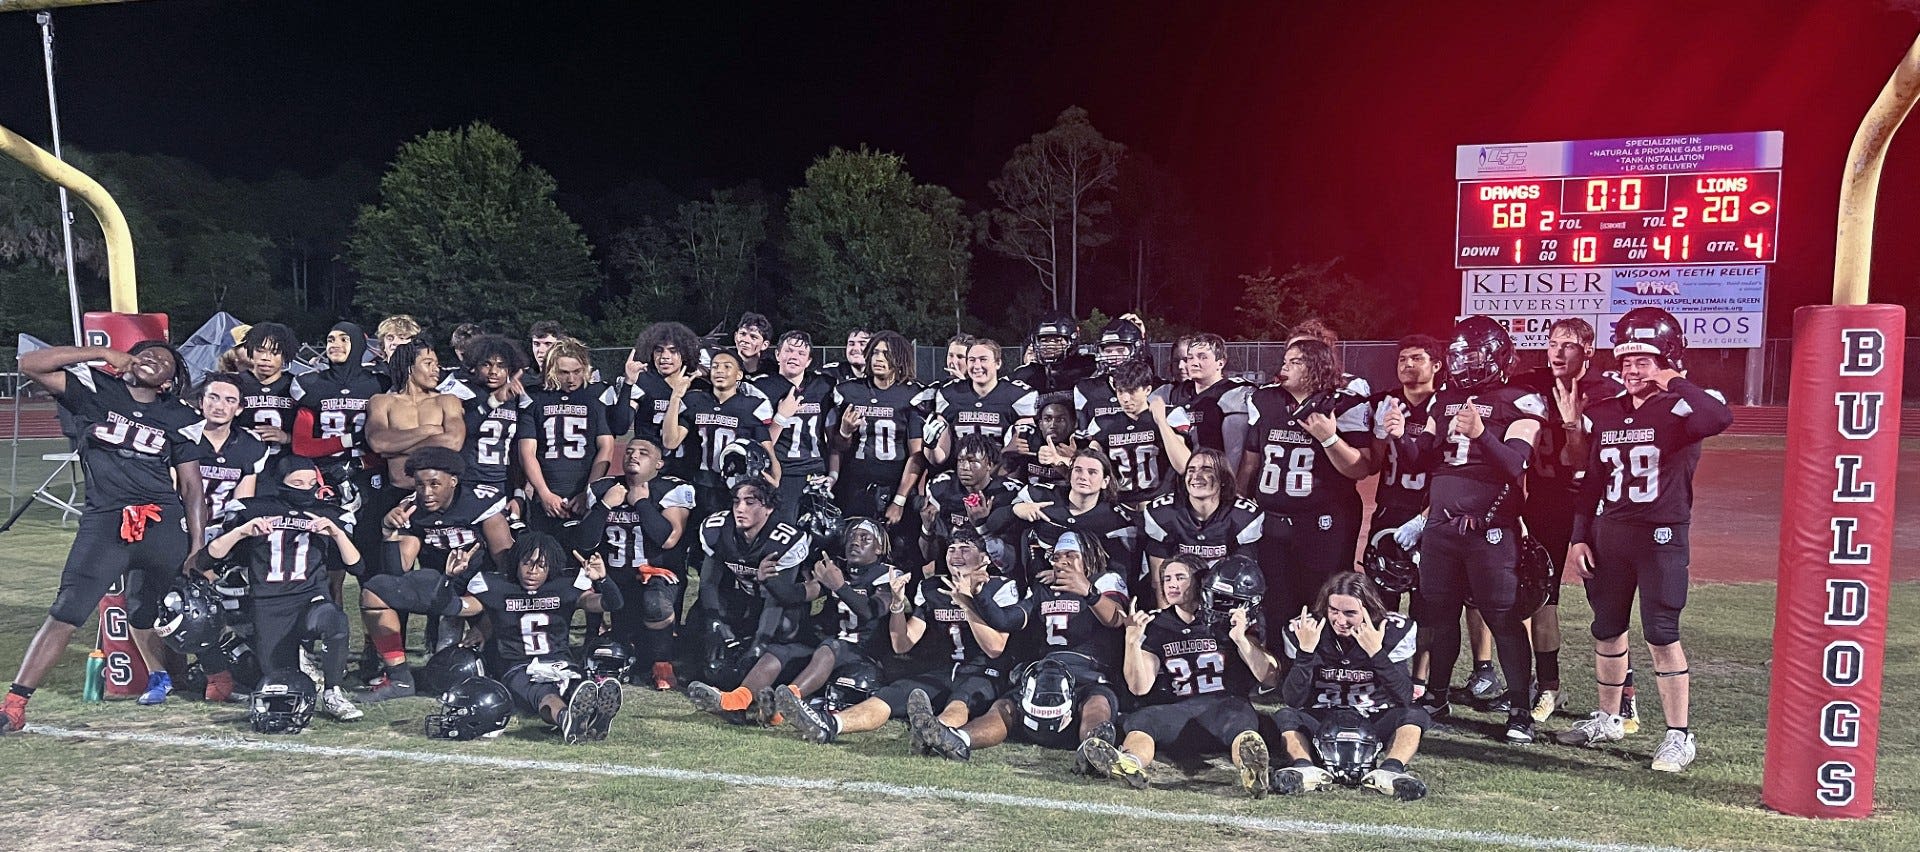 Spring football: What we learned about South Fork in dominating night vs. Olympic Heights